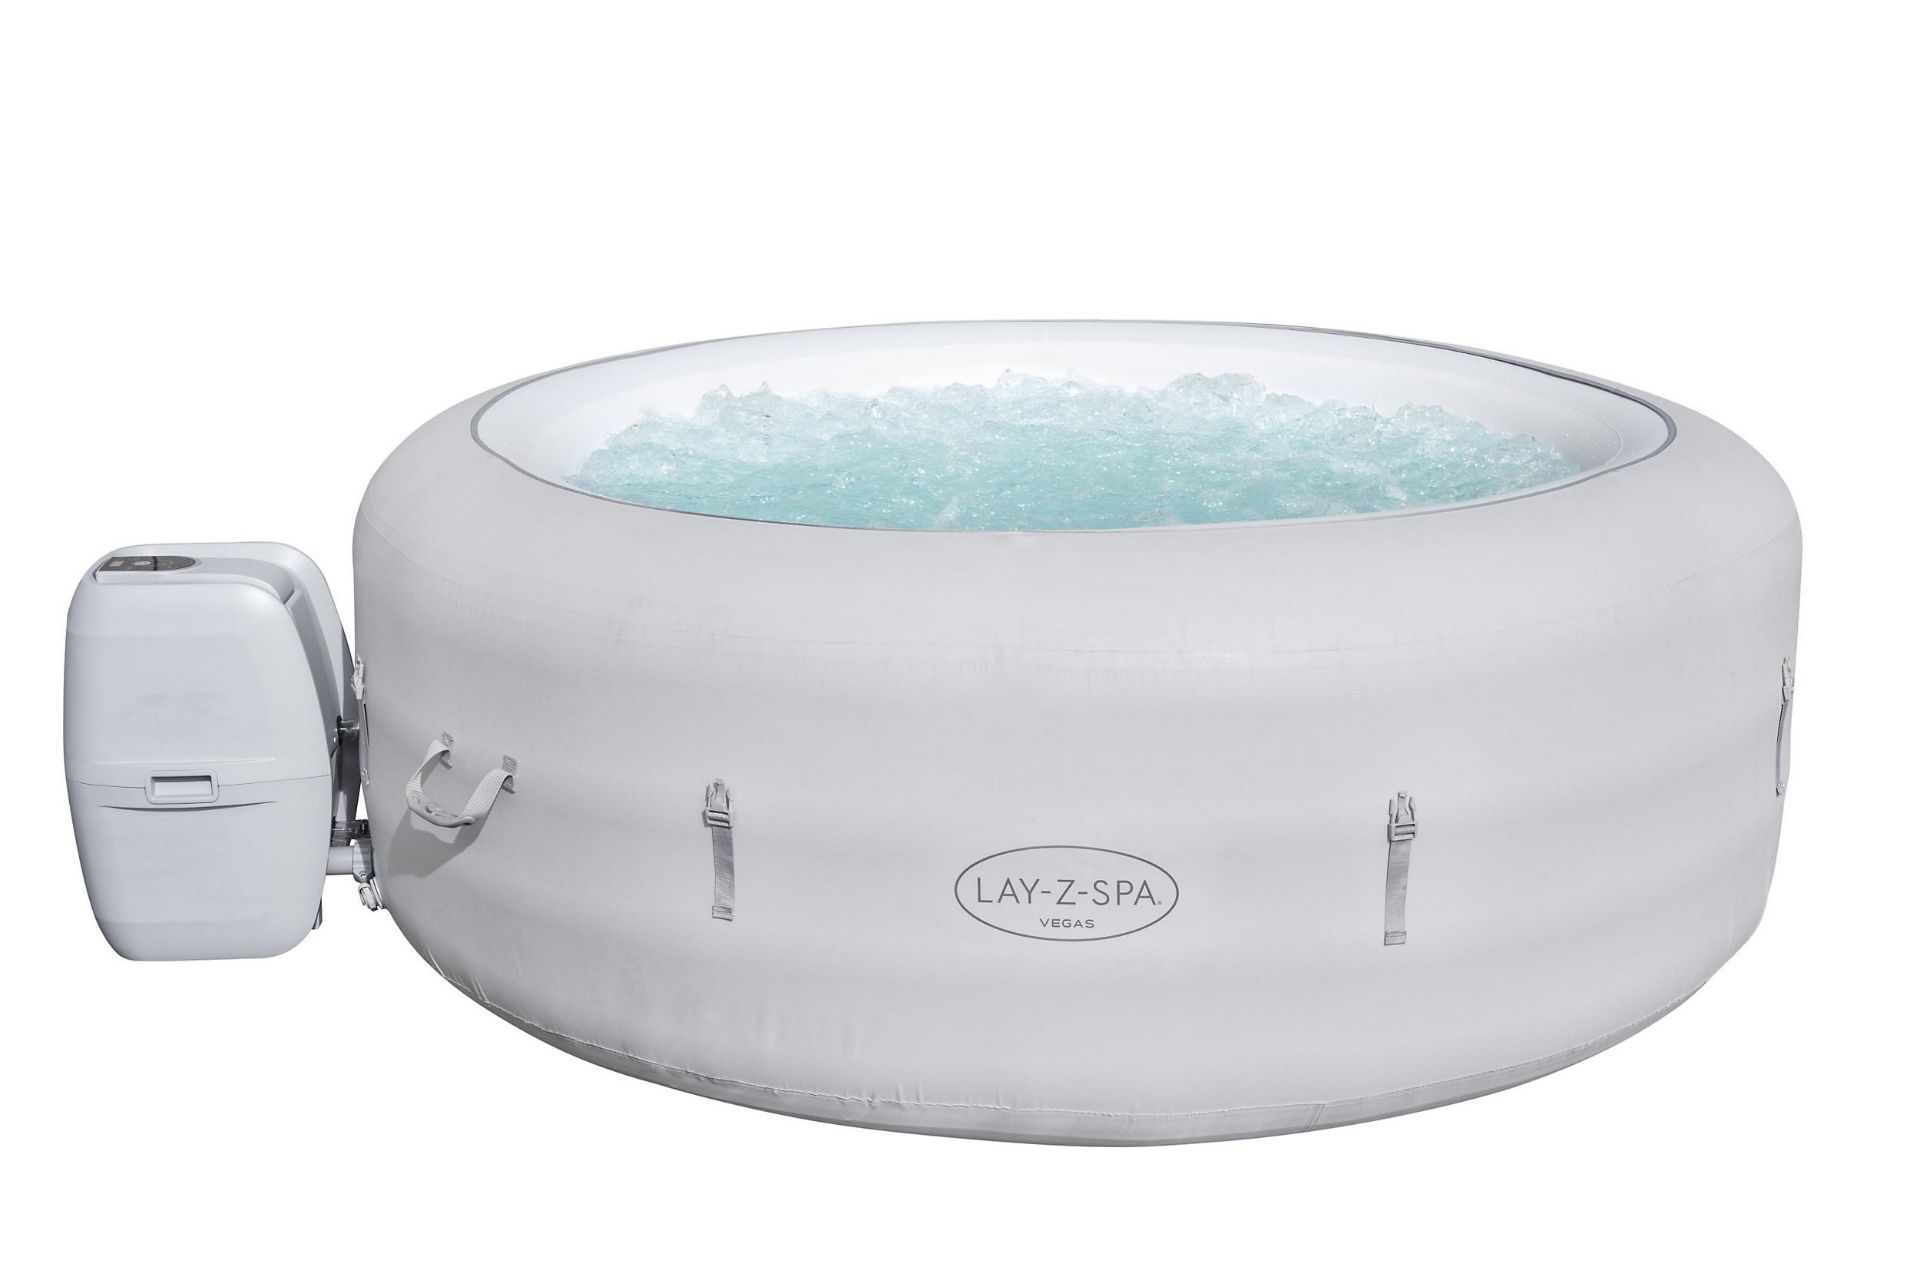 NEW & BOXED LAY-Z-SPA 6 PERSON VEGAS AIRJET. RRP £599. This popular Vegas AirJet™ is perfect for